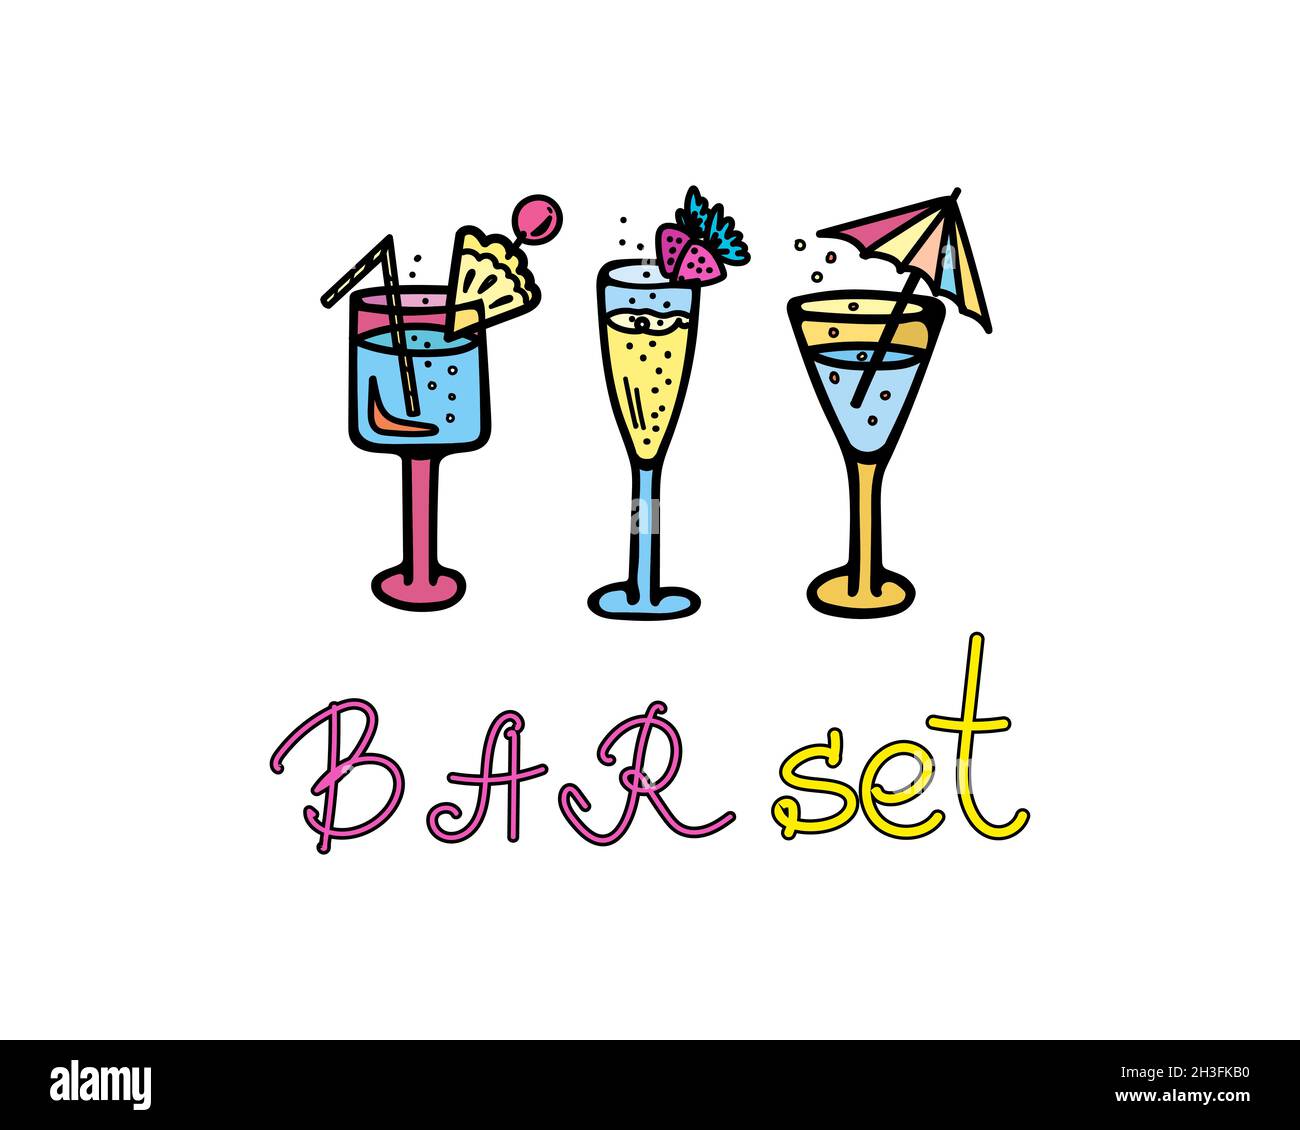 https://c8.alamy.com/comp/2H3FKB0/set-of-color-vector-illustrations-of-glasses-of-cocktails-with-bubbles-pineapple-umbrella-and-berries-lettering-bar-set-2H3FKB0.jpg